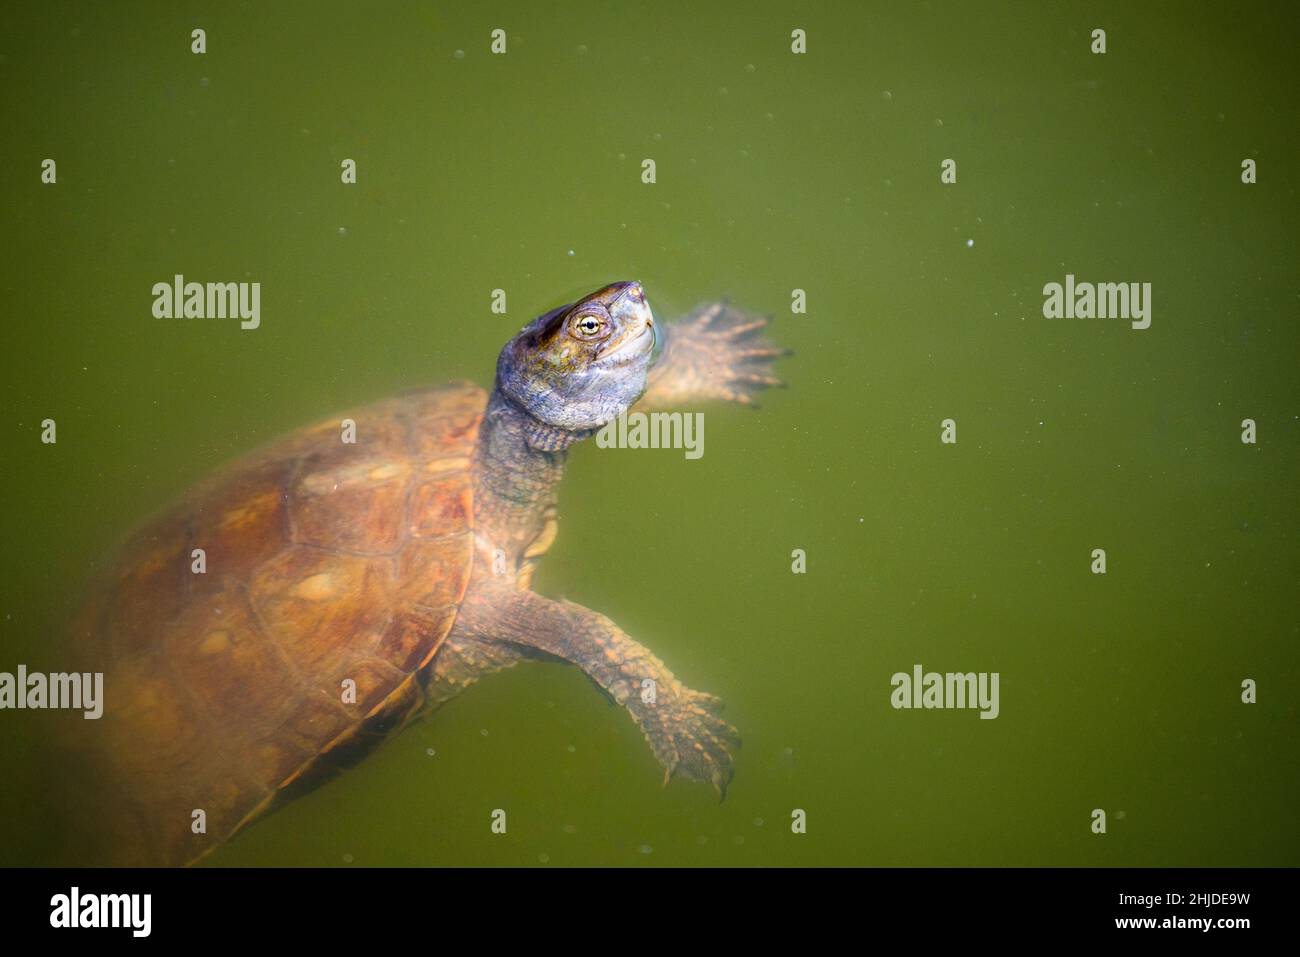 Spanish pond turtle (Mauremys leprosa) swims on the surface of the water. Stock Photo